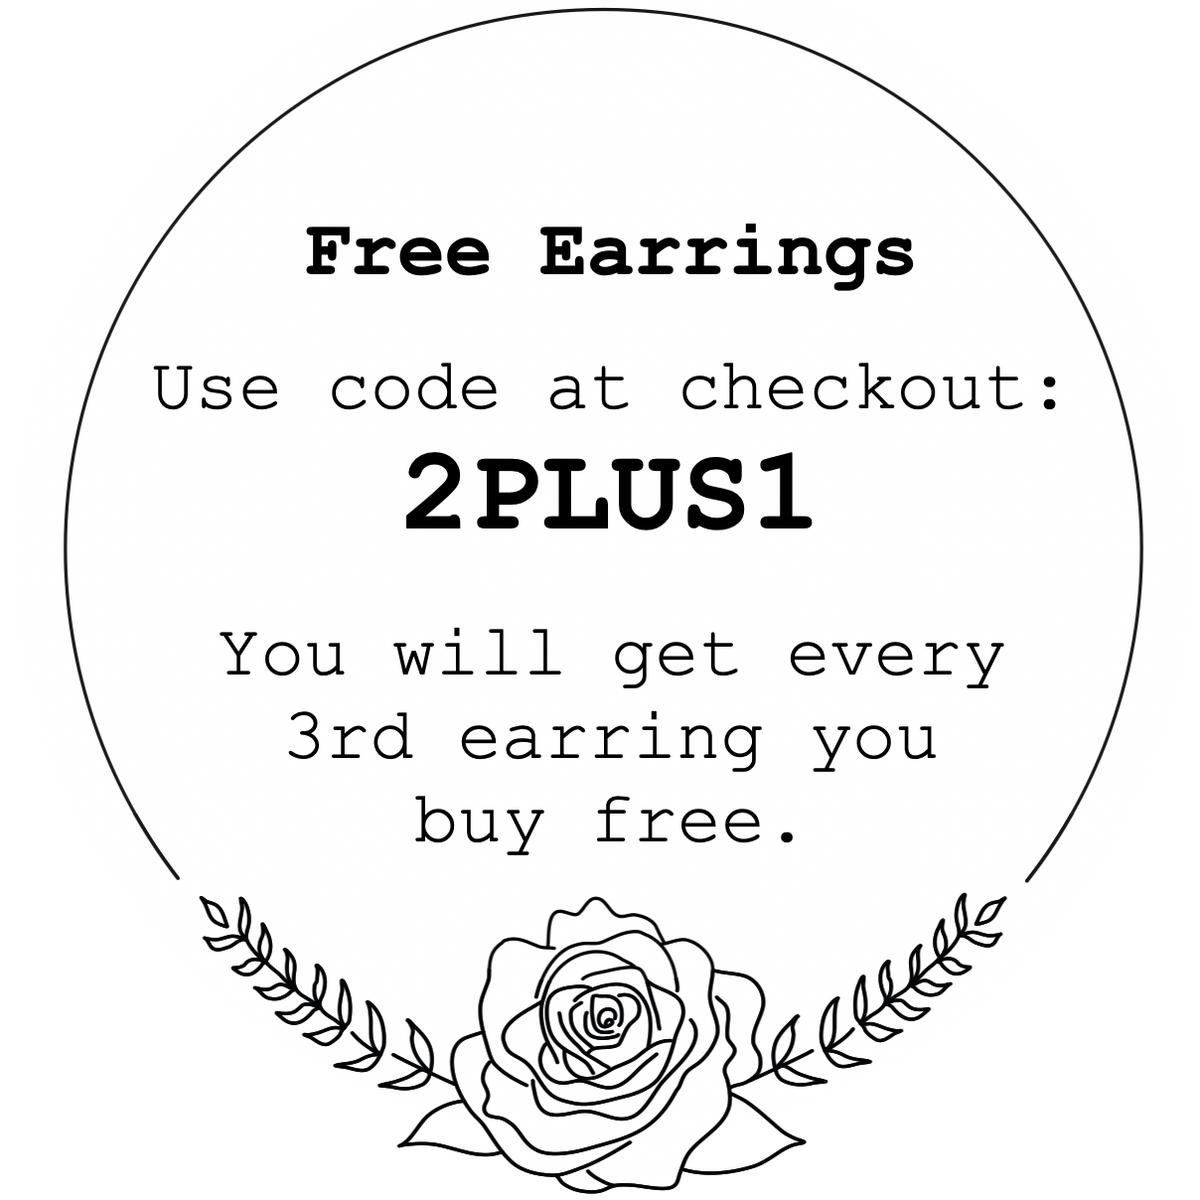 Get Your 3rd Earring